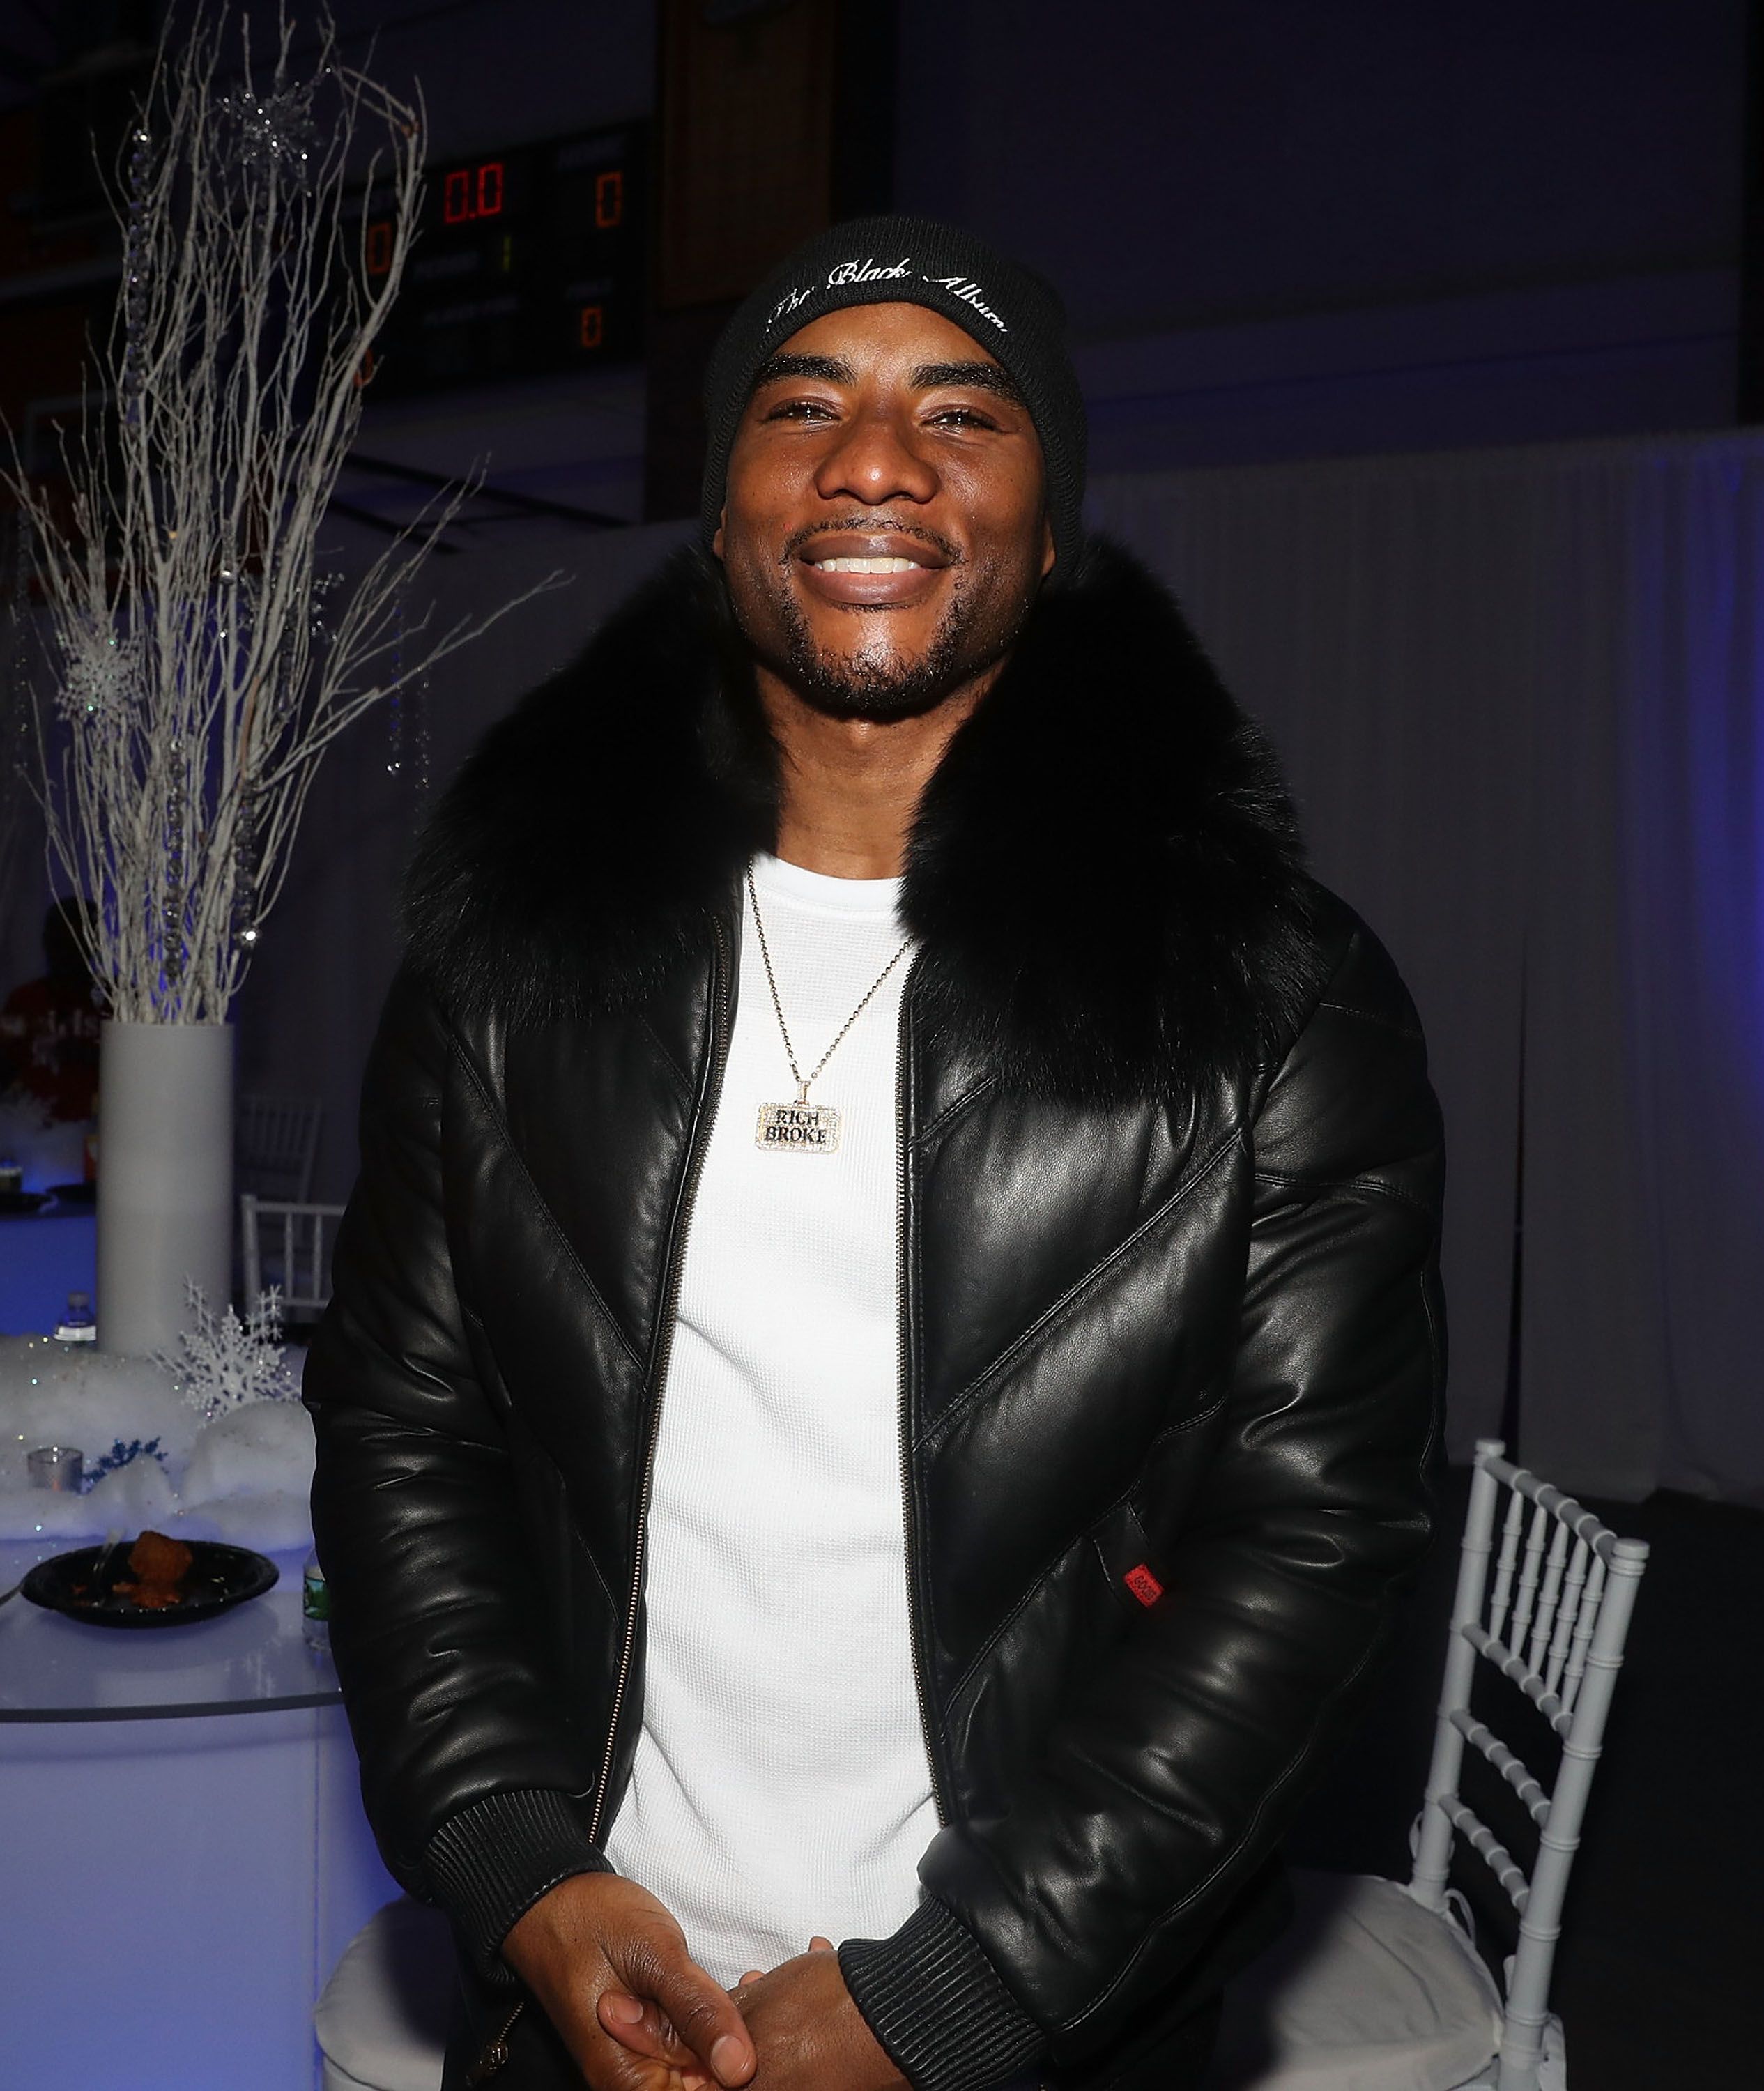  Charlamagne tha God at the 3rd Annual Winter Wonderland Holiday Charity Event hosted by La La Anthony in 2018 in New York City | Source: Getty Images